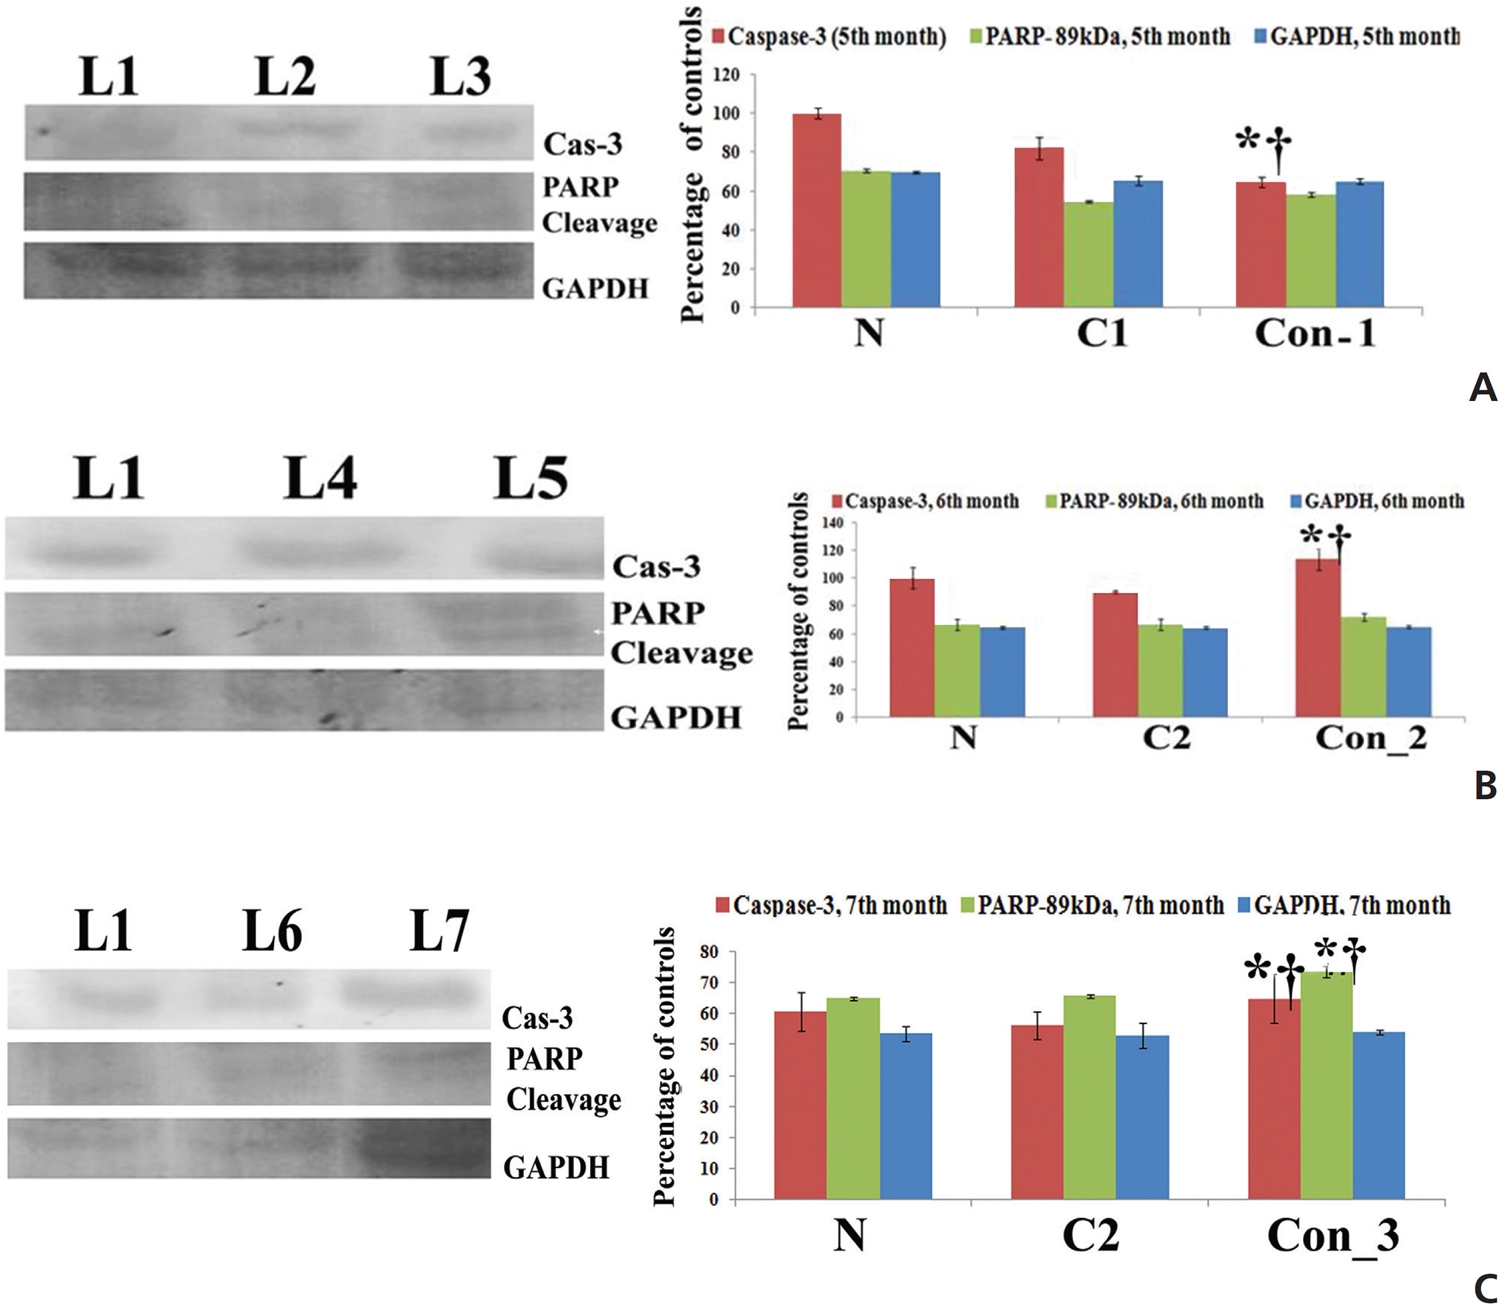 Study on expression of caspase-3 and PARP by western blot at different post-cancerous time points. *P < 0.05 normal vs. cancer and
normal vs. Condurango treatment at the 5th, 6th & 7th month, and †P < 0.05 cancer vs. Condurango treatment at the 5th, 6th & 7th month.